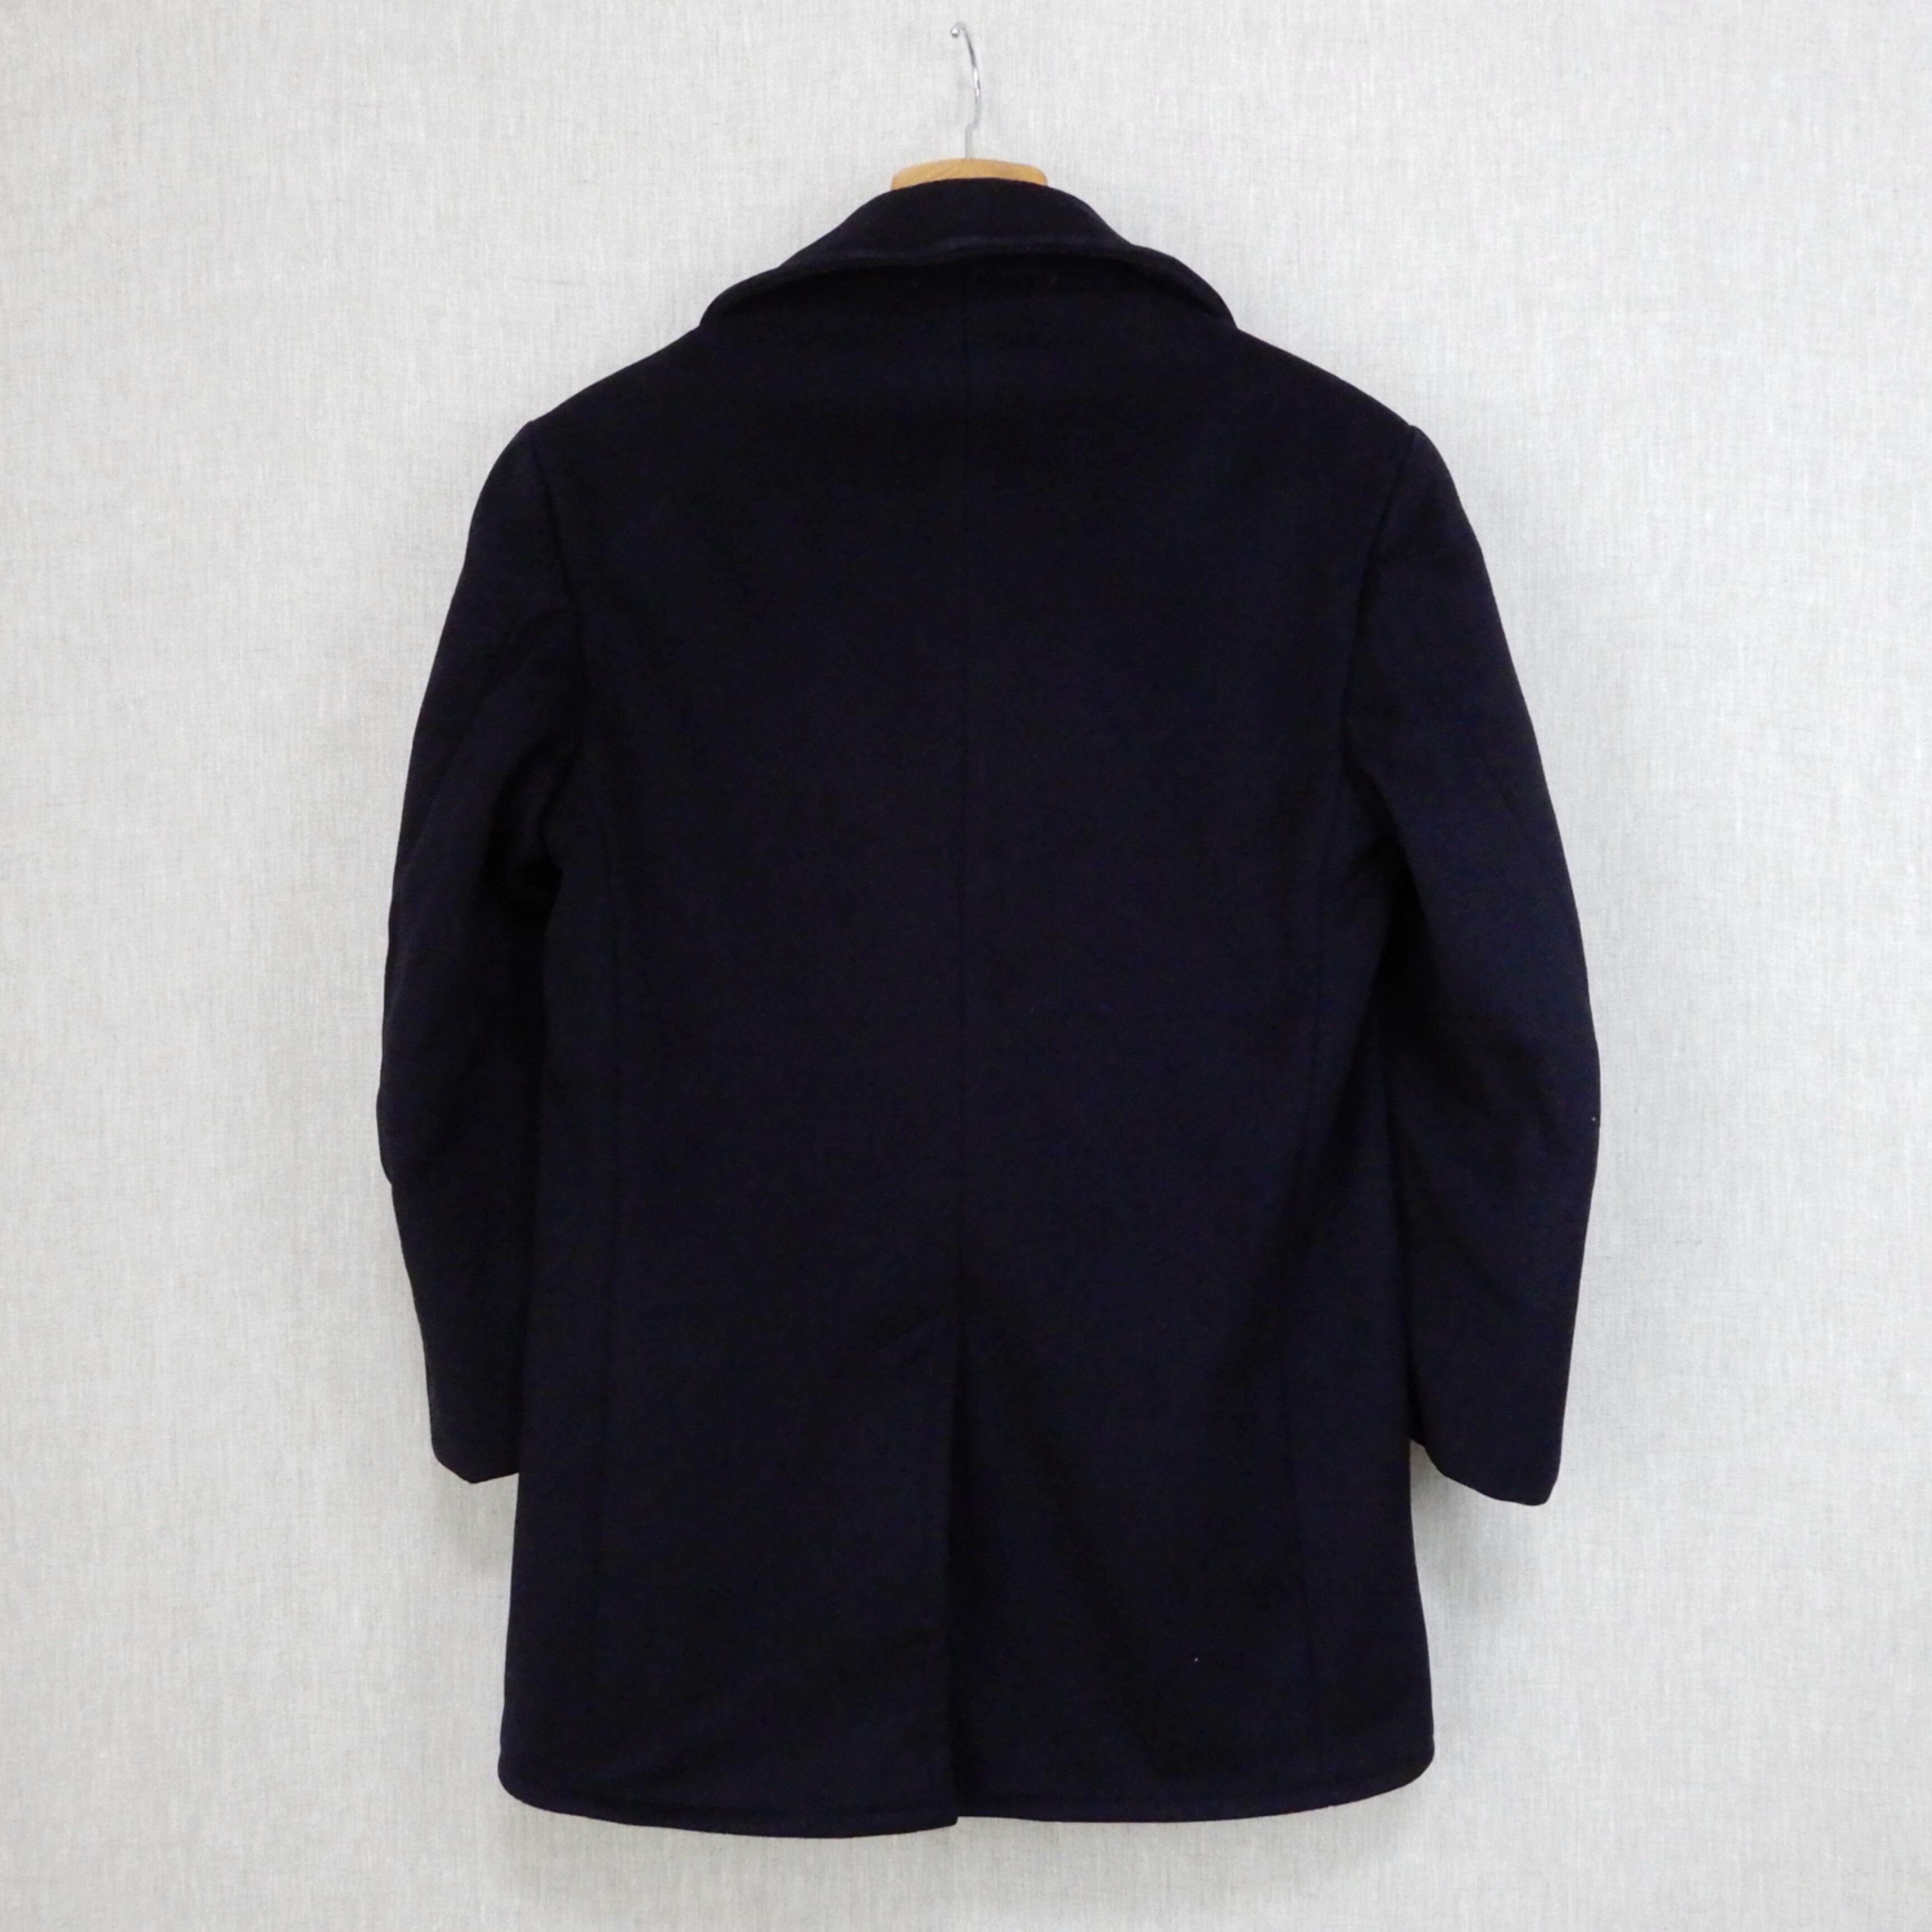 US NAVY P-COAT 1960s Size About36